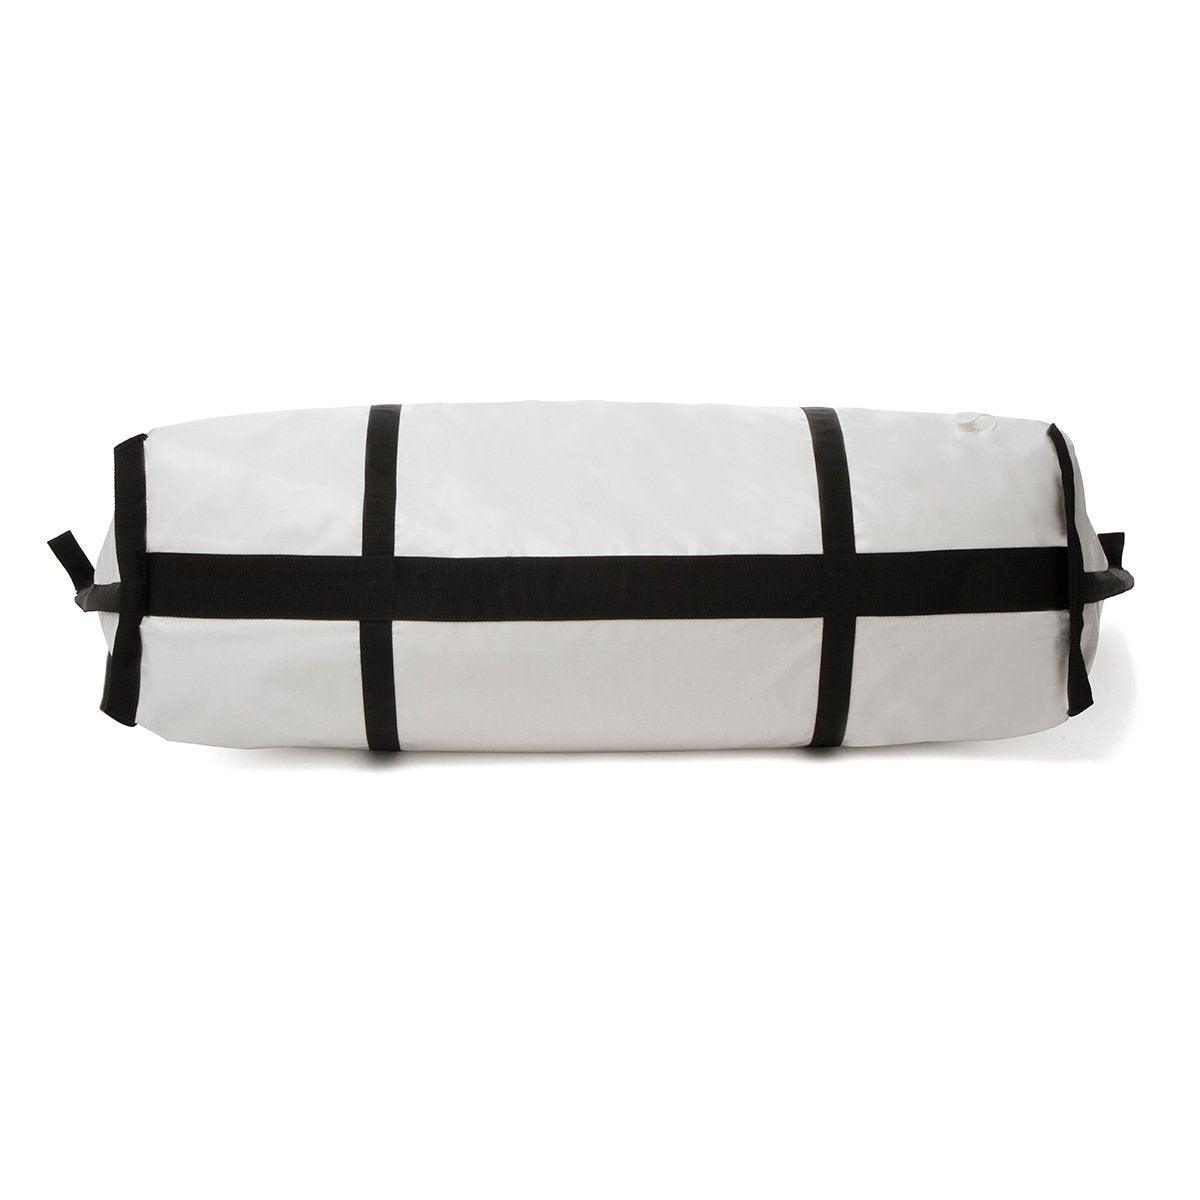 30 x 72 Insulated Kill Bag: Offshore